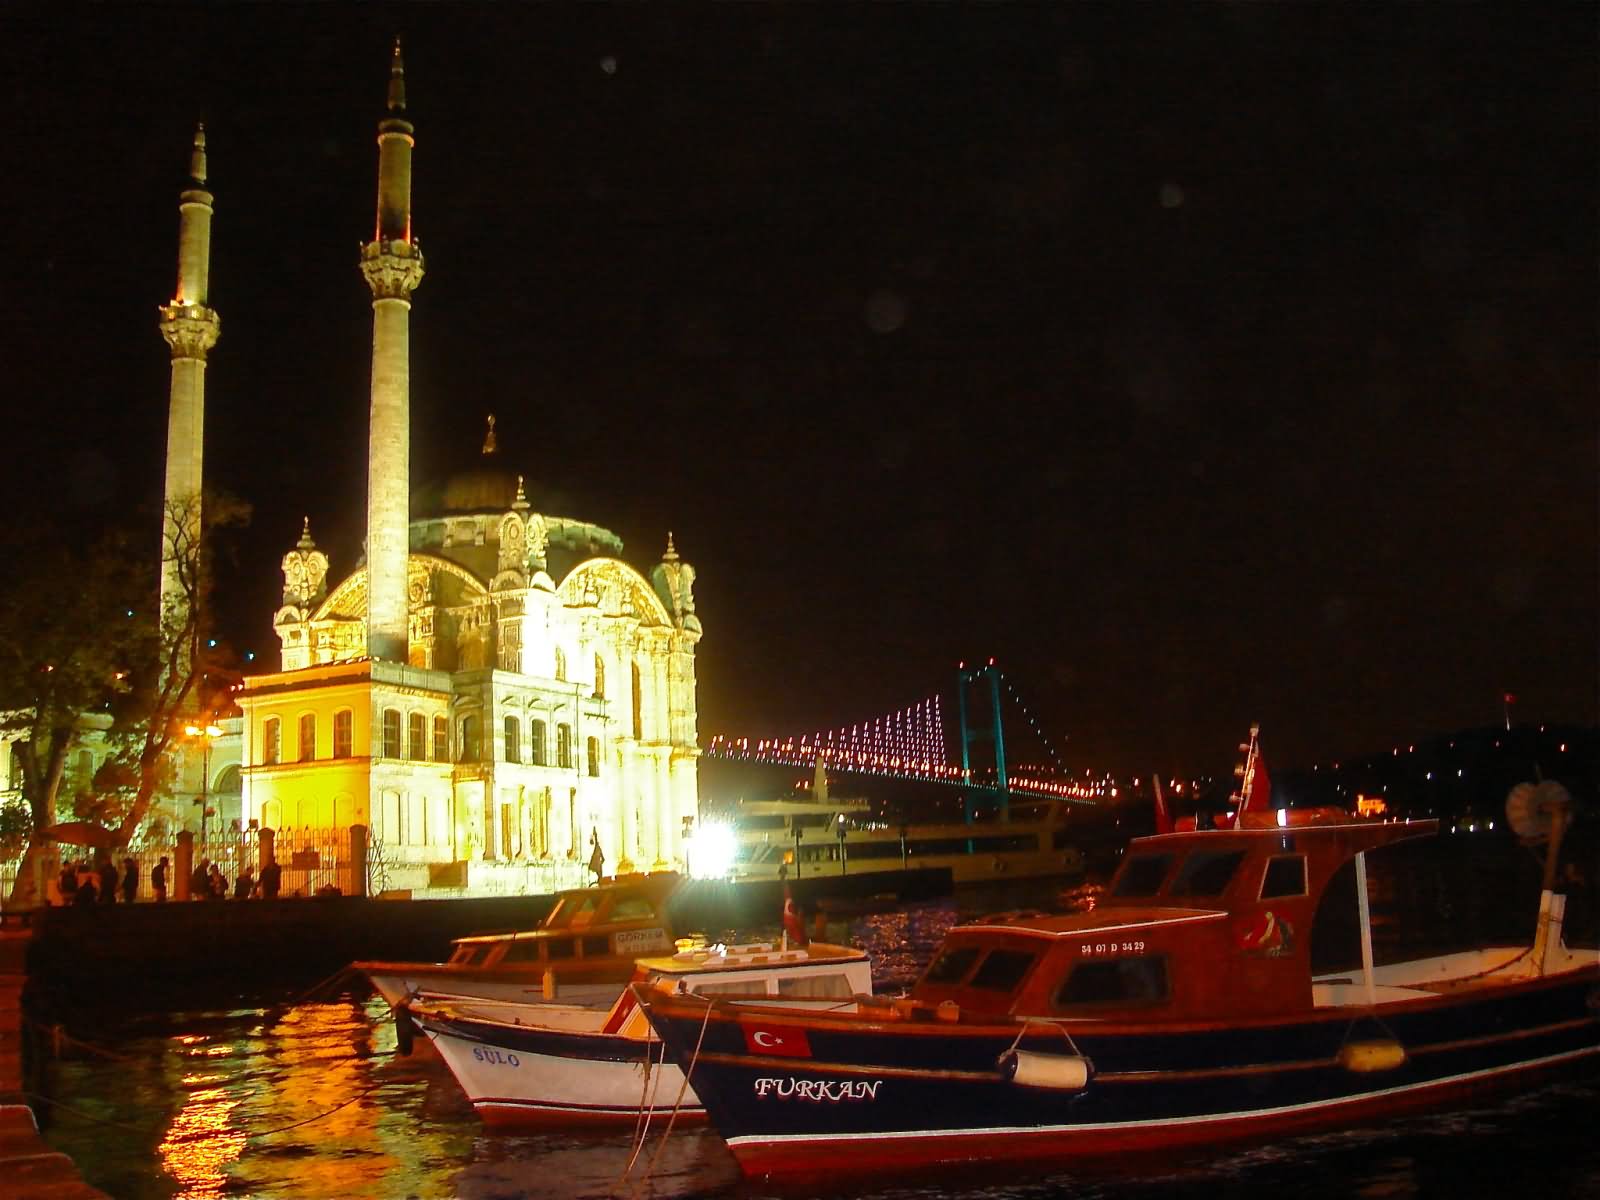 The Ortakoy Mosque Night Picture